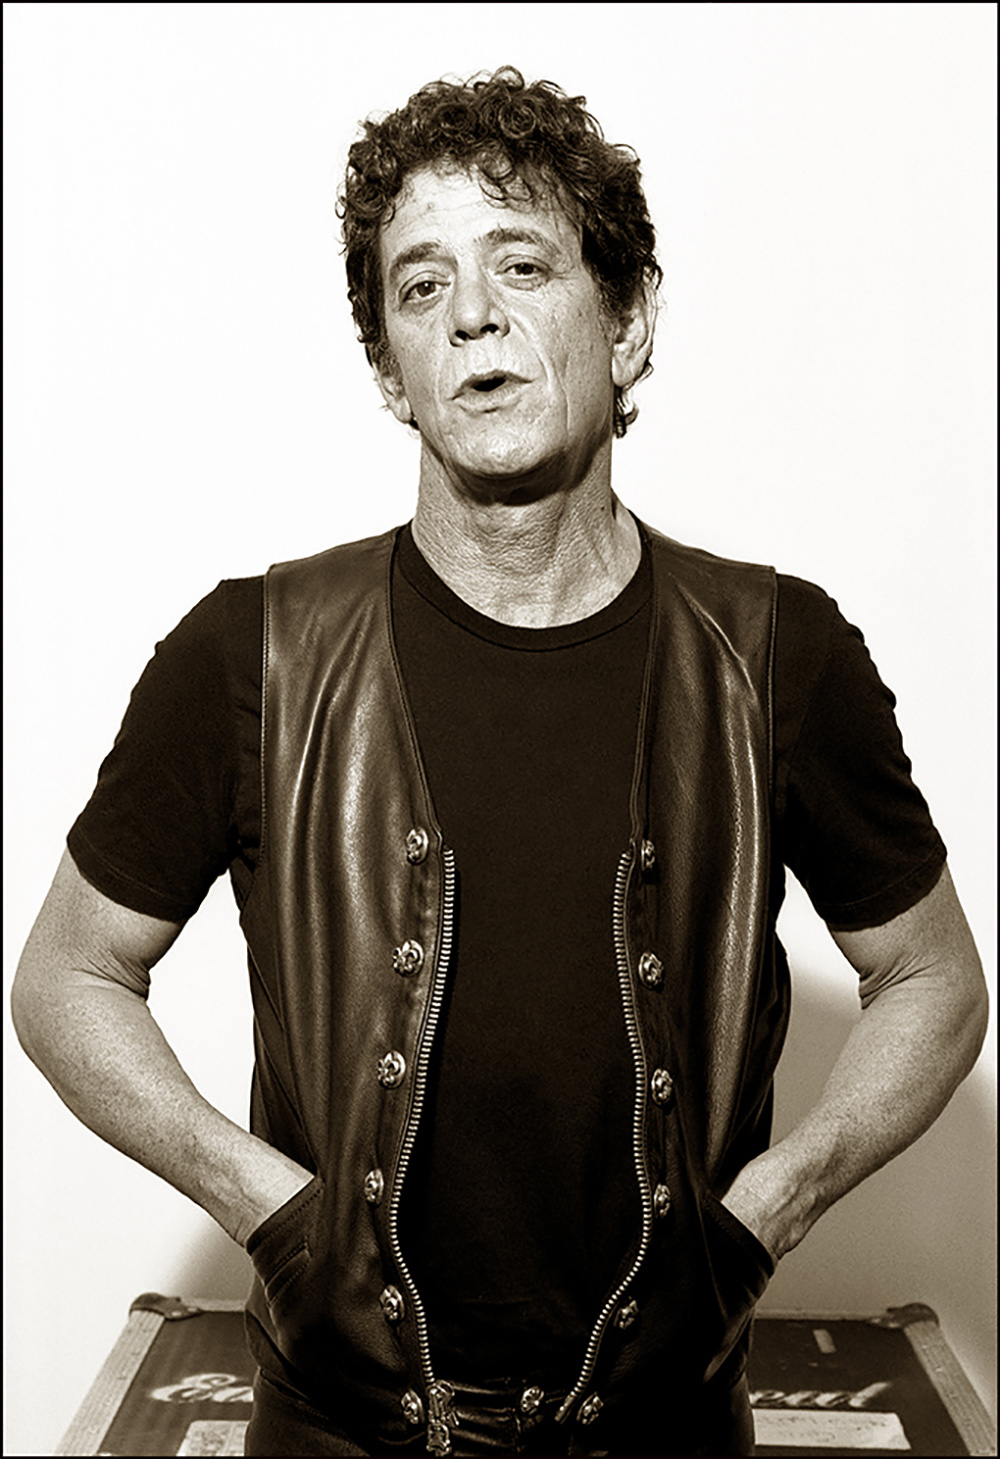 Lou Reed, backstage in Warsaw, August 2000